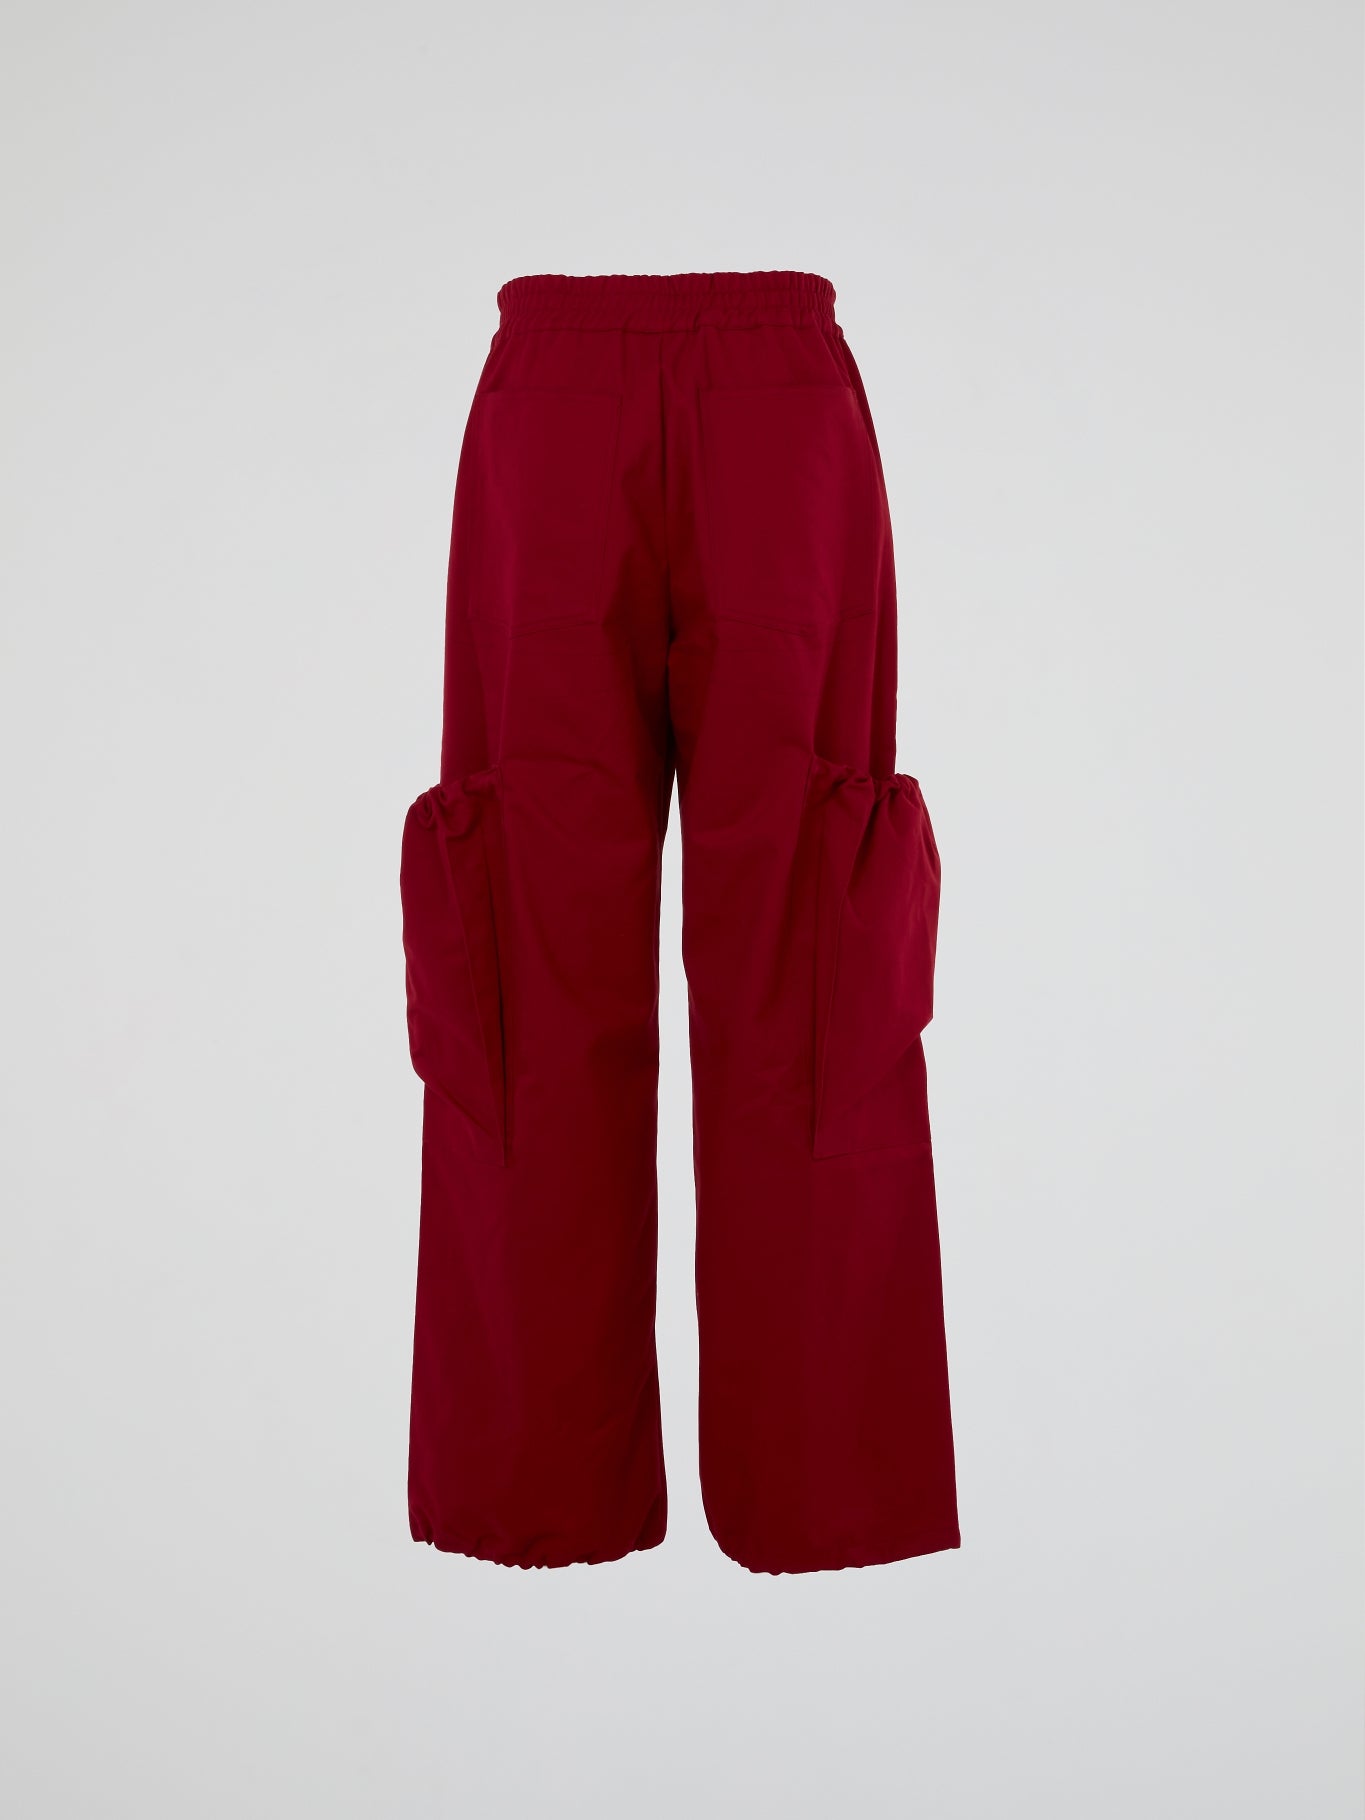 Red Cotton Twill Cargo Pants